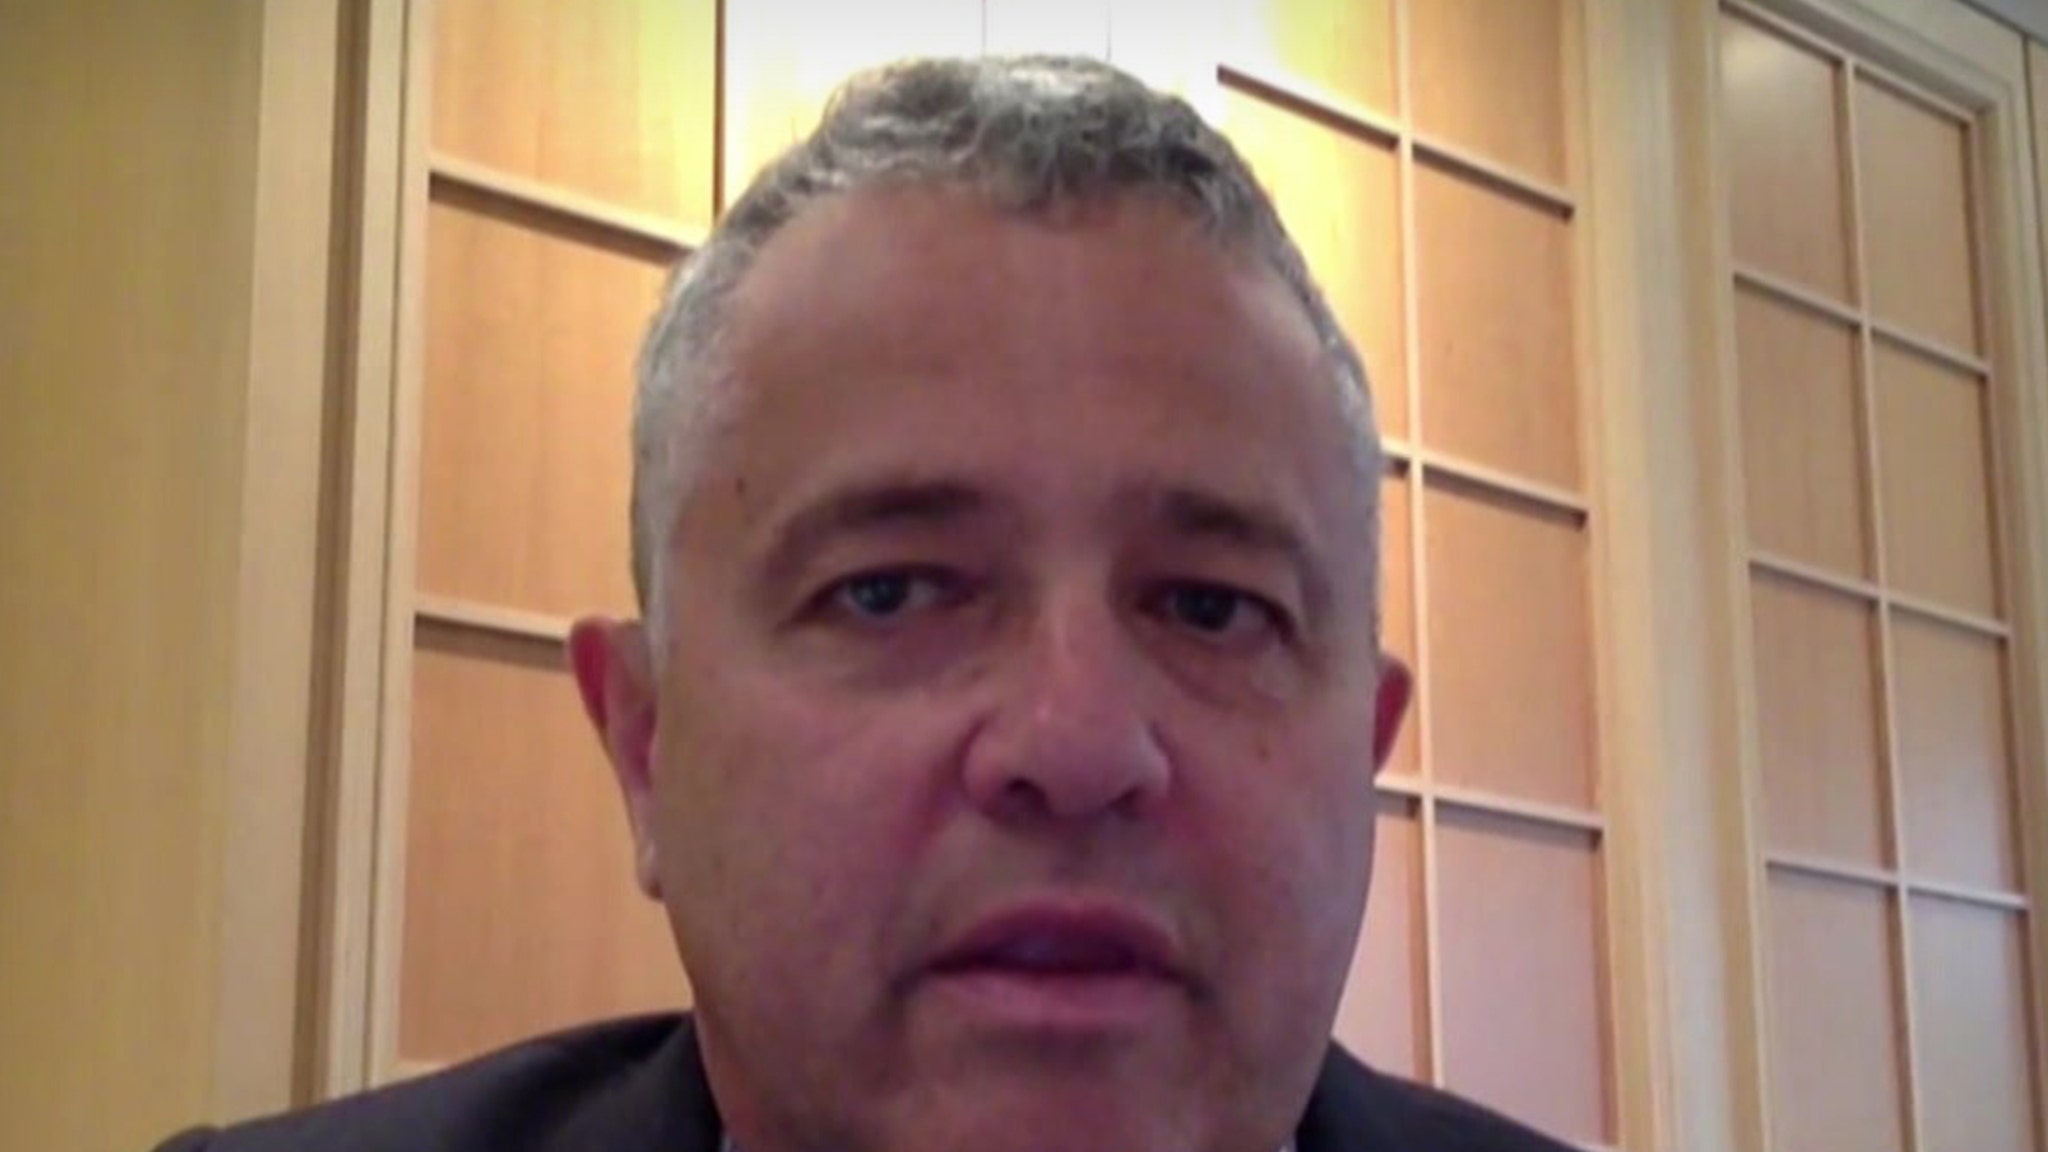 CNN's Jeffrey Toobin Fired by New Yorker Over Zoom Exposure Incident